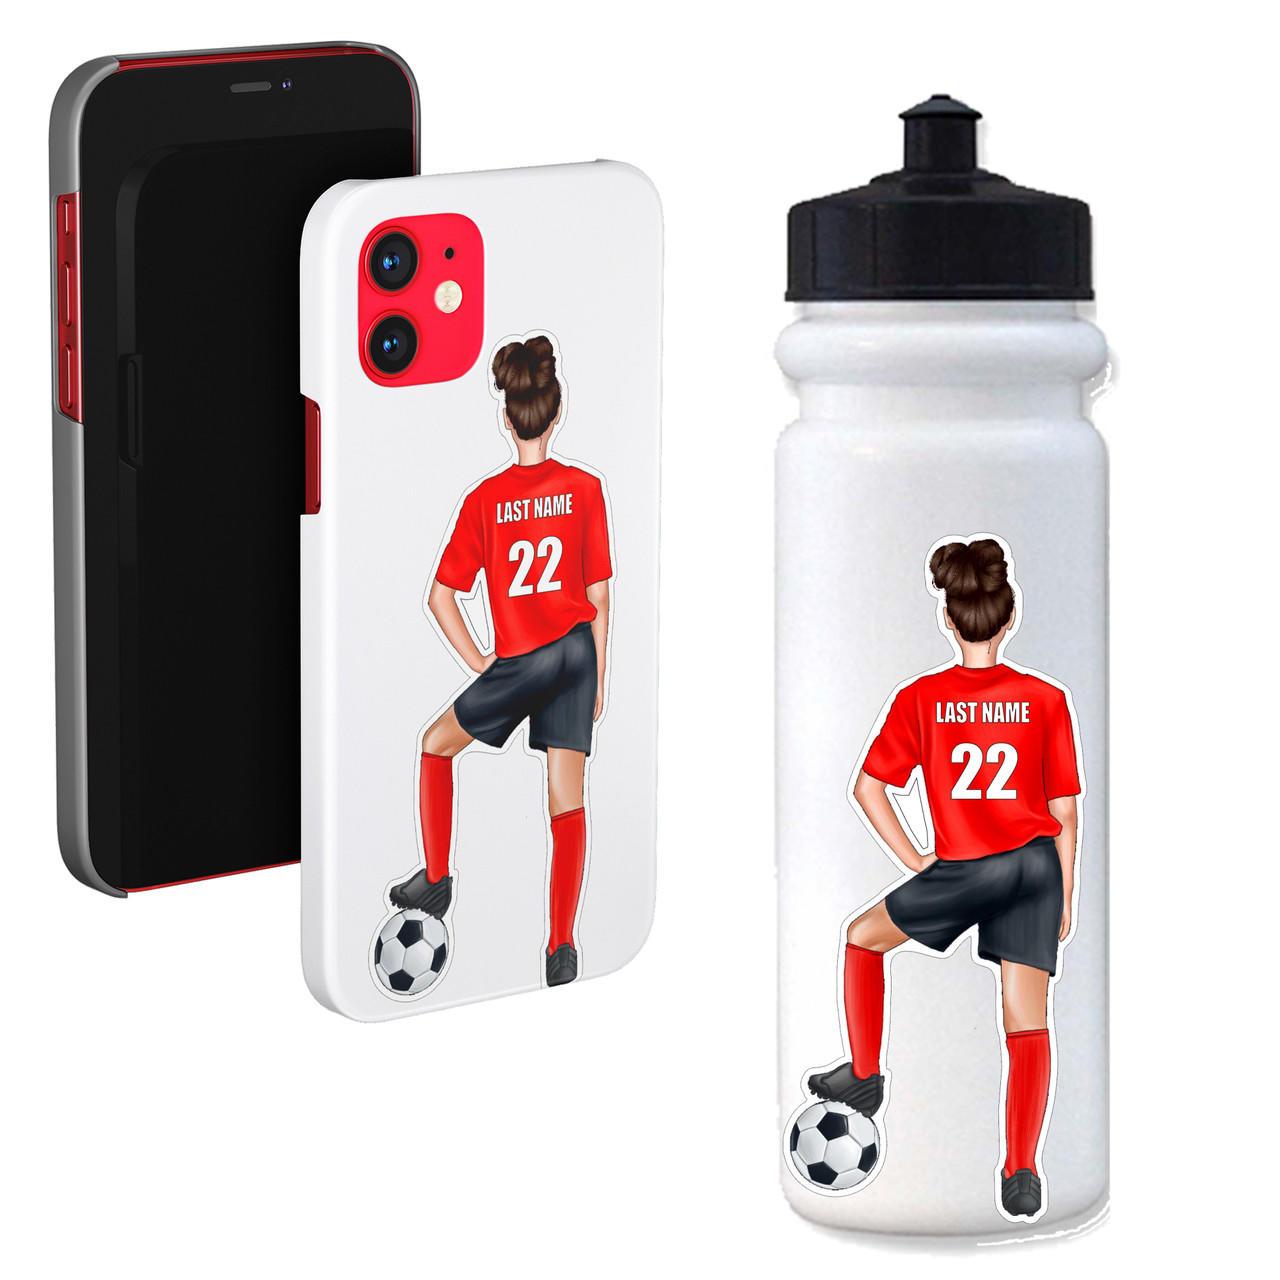 Personalized Female Soccer Sticker Questions & Answers